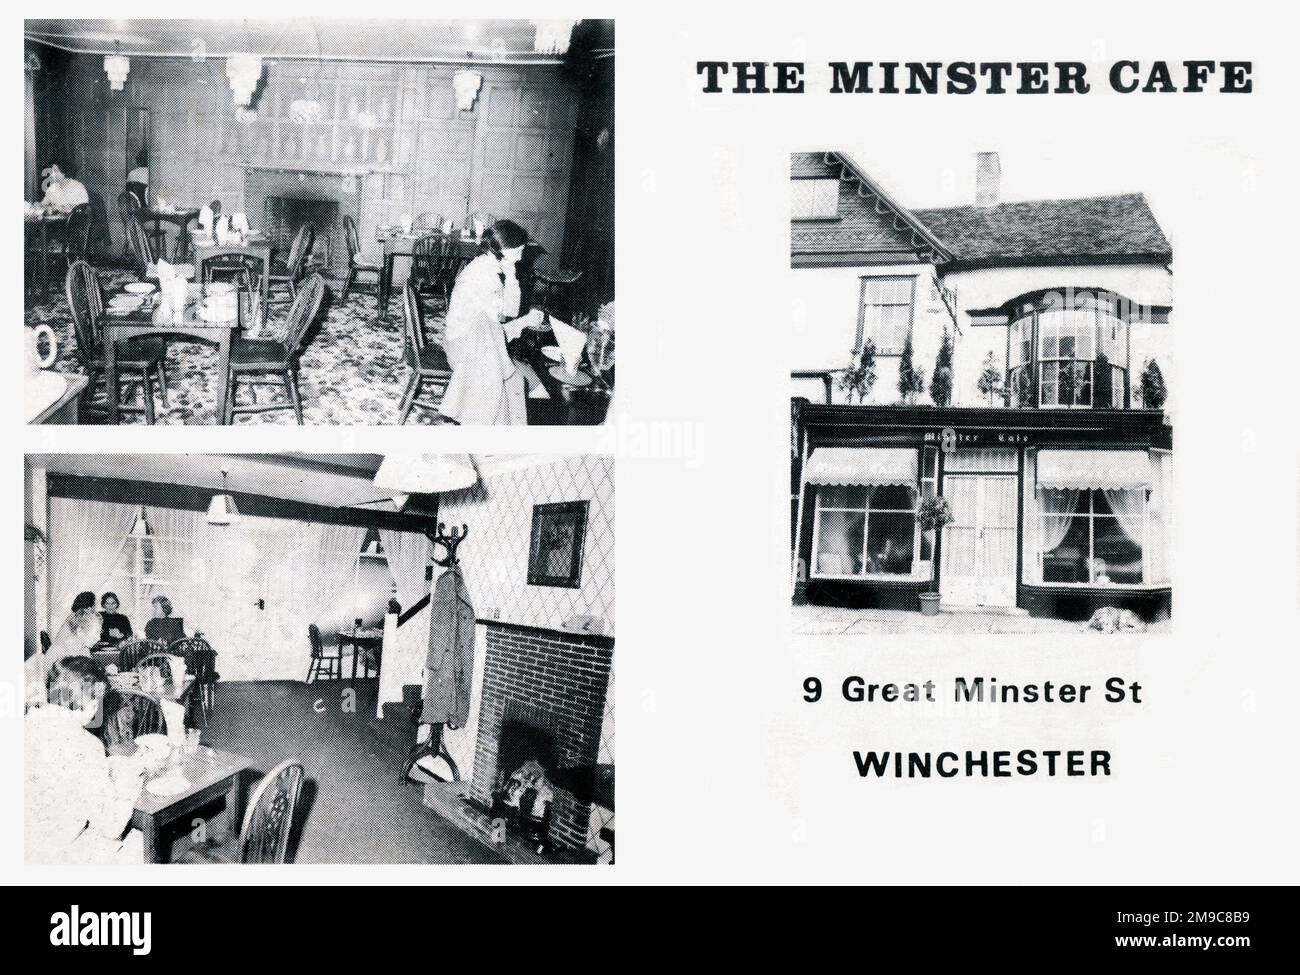 The Minster Cafe, 9 Great Minster Street, Winchester, Hampshire Foto Stock